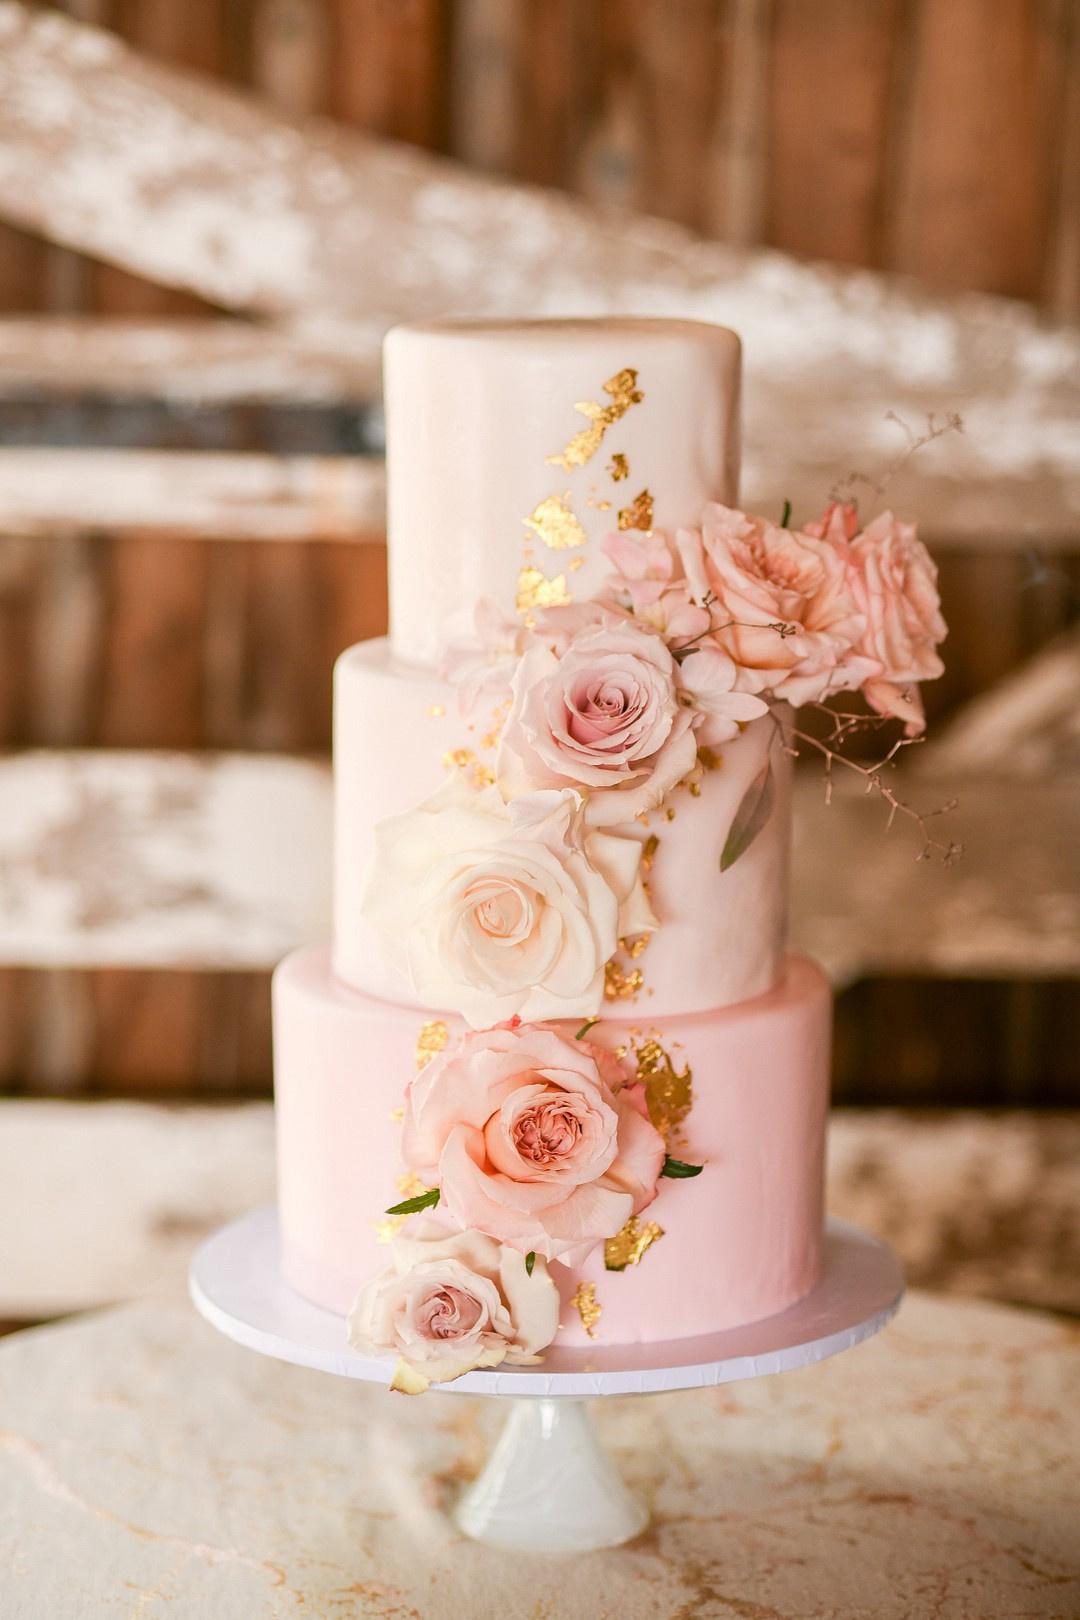 3 Tier Wedding Cake with two side cakes | Baked by Nataleen